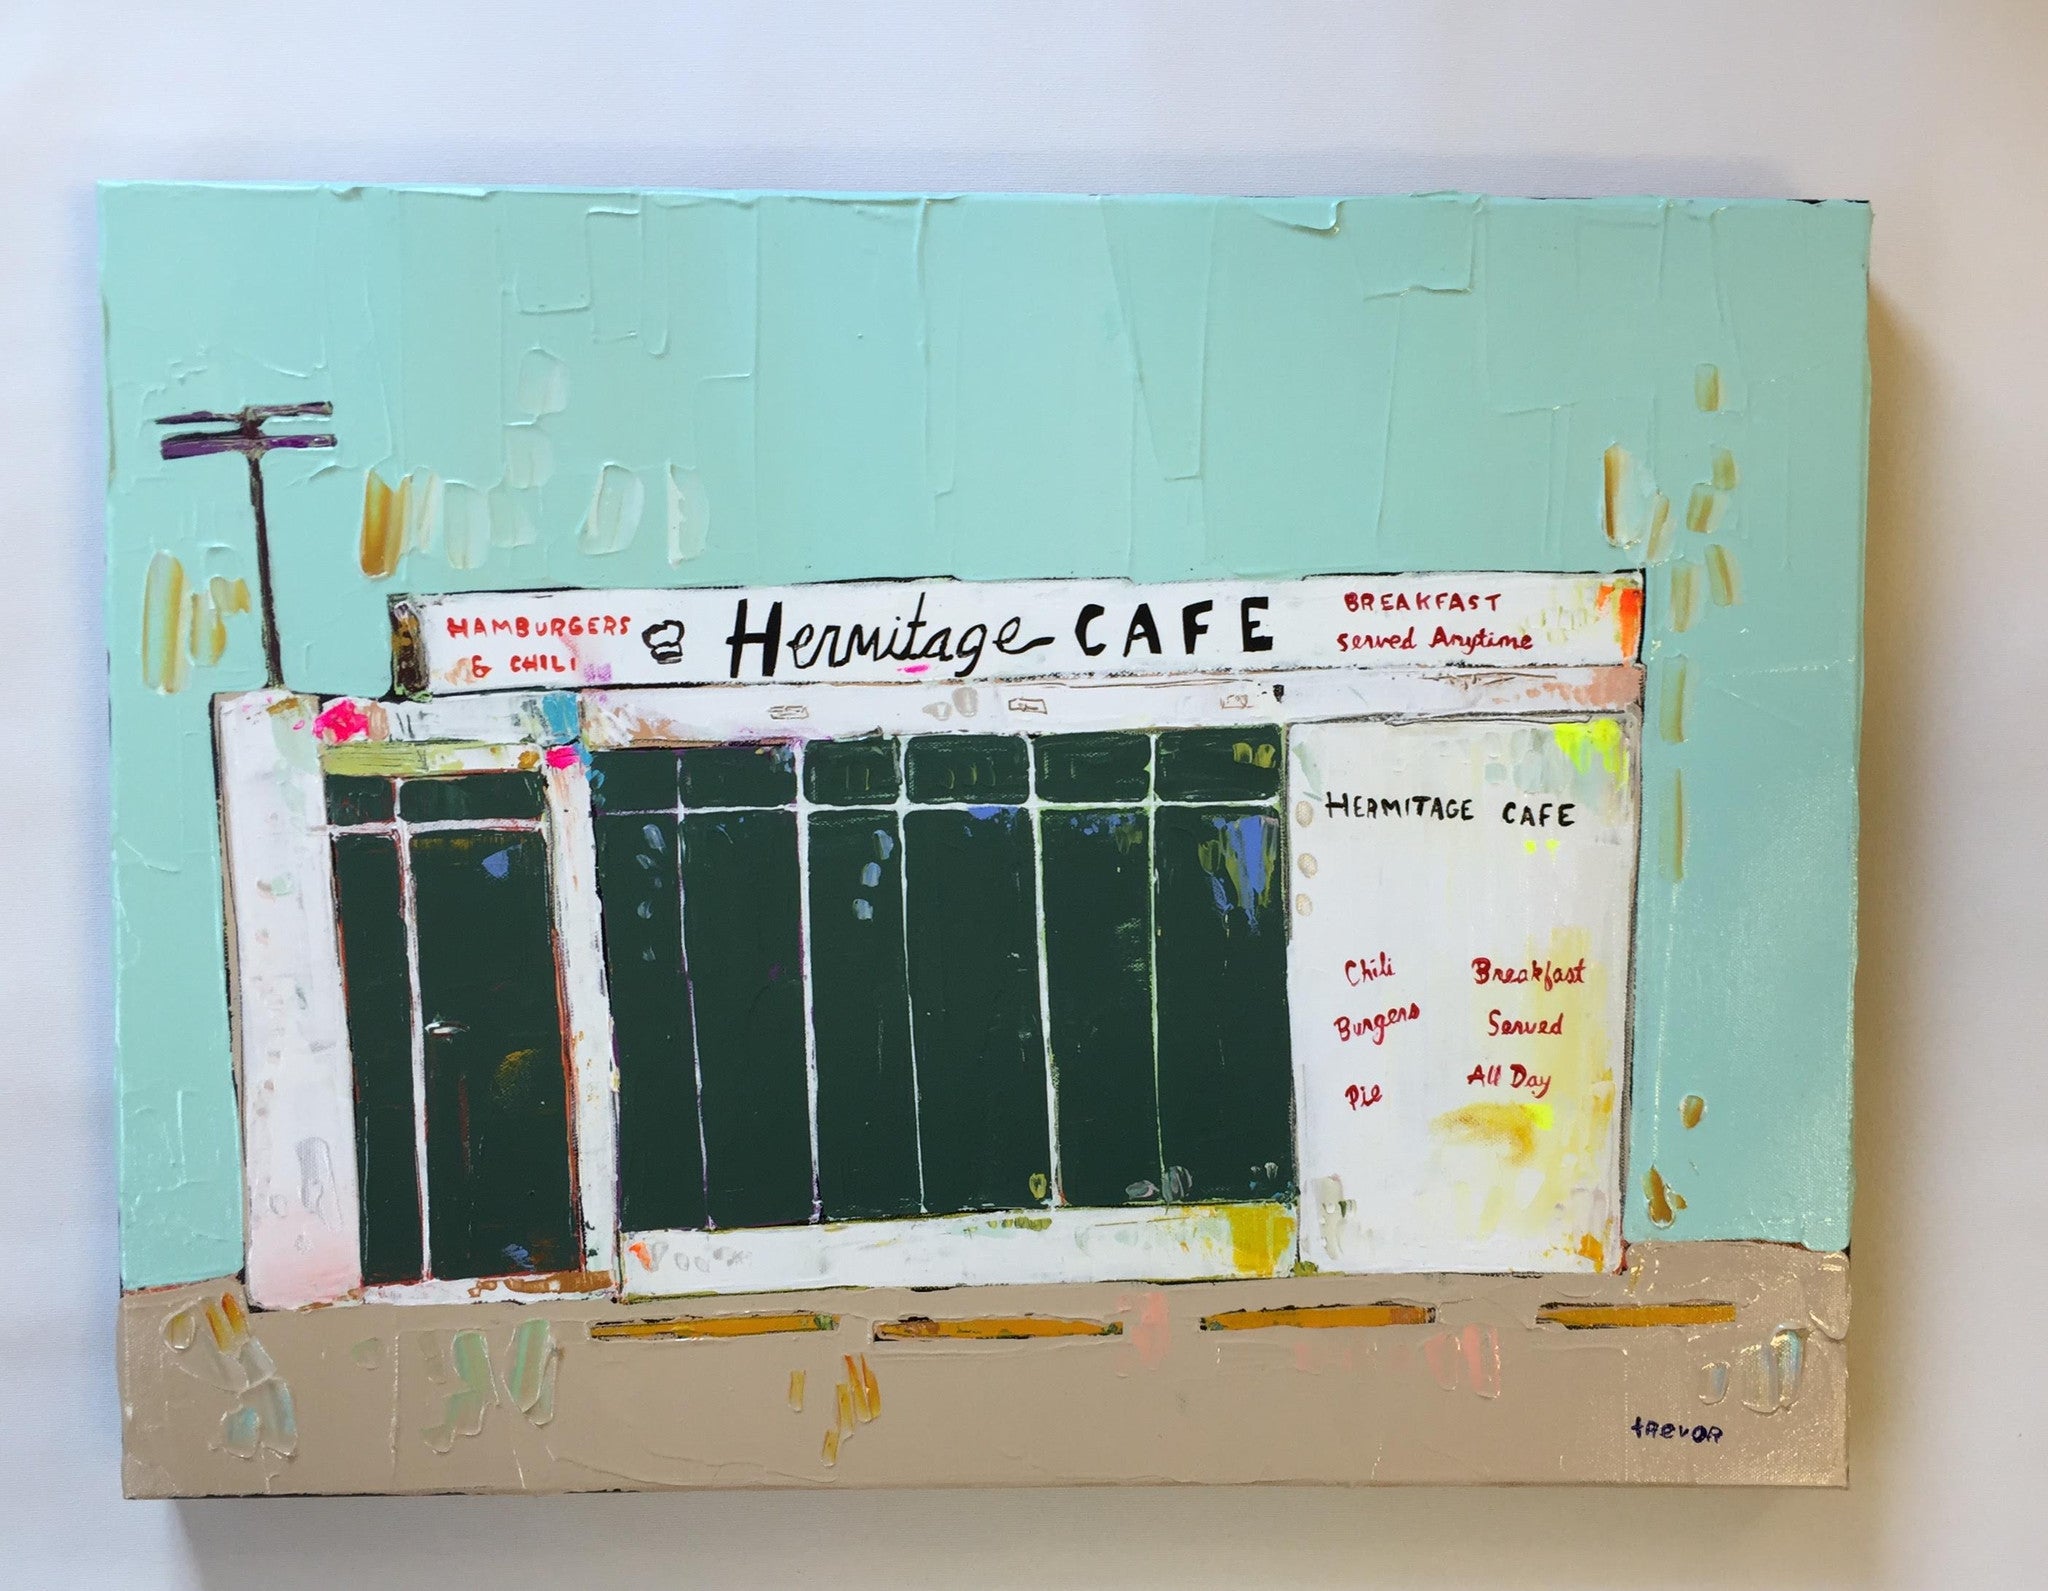 The Hermitage Cafe